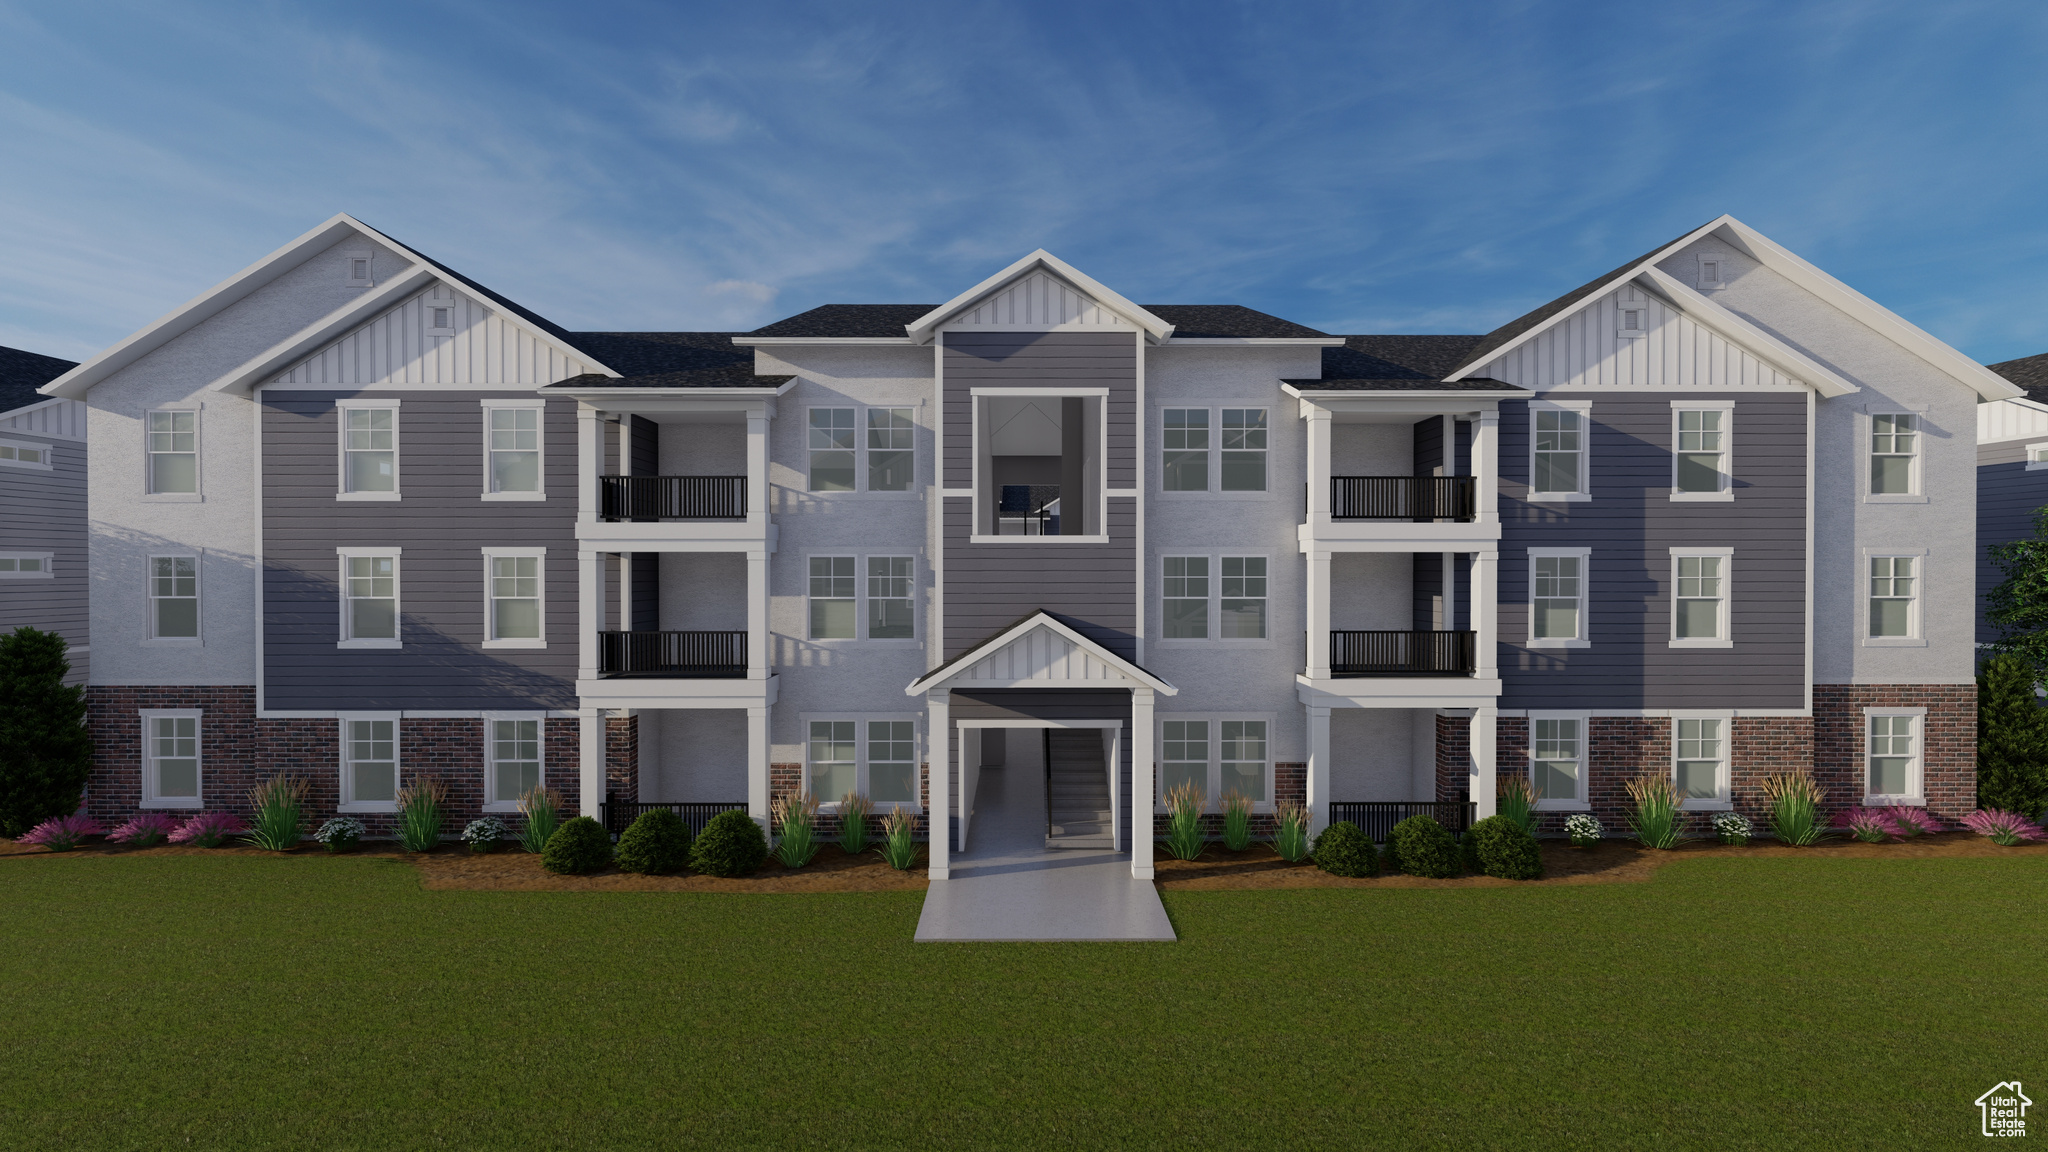 Townhome / multi-family property with a front lawn and a balcony